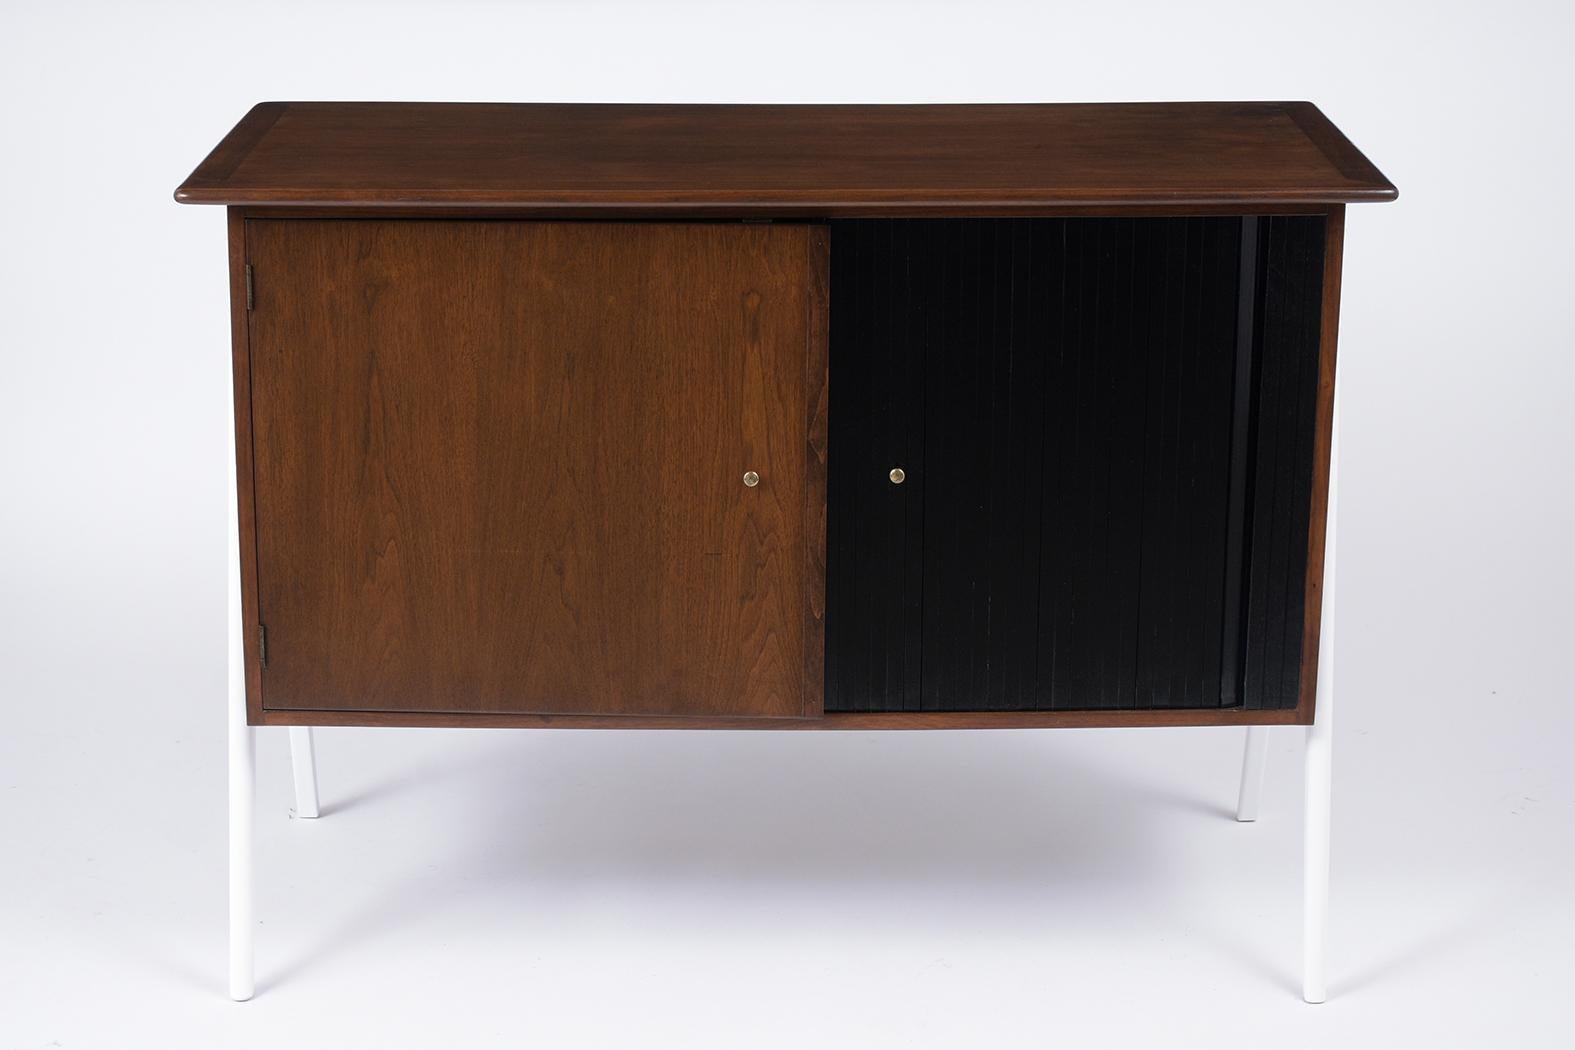 This Danish 1960s two-sided walnut server is unique, has been restored, and has been stained in a walnut, white, black color combination with a newly lacquered finish. The front of the server features a single door with a brass knob and a single